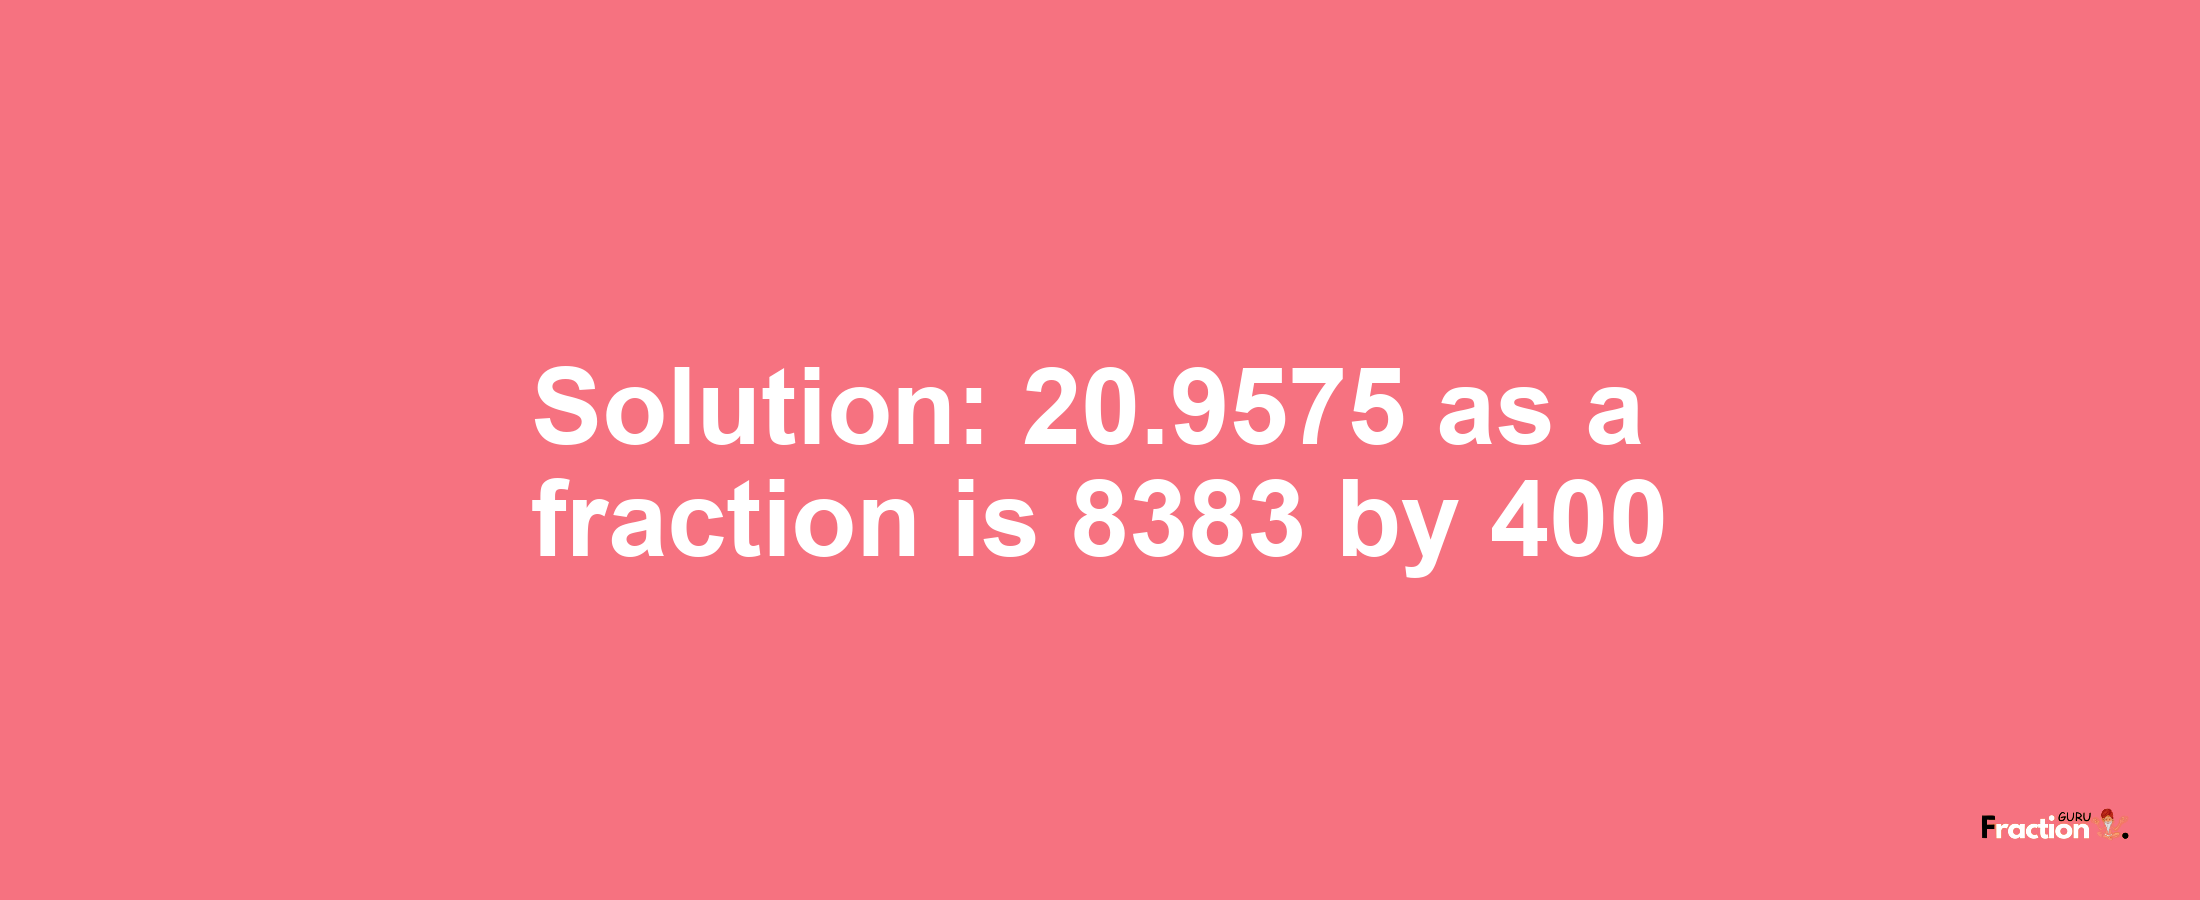 Solution:20.9575 as a fraction is 8383/400